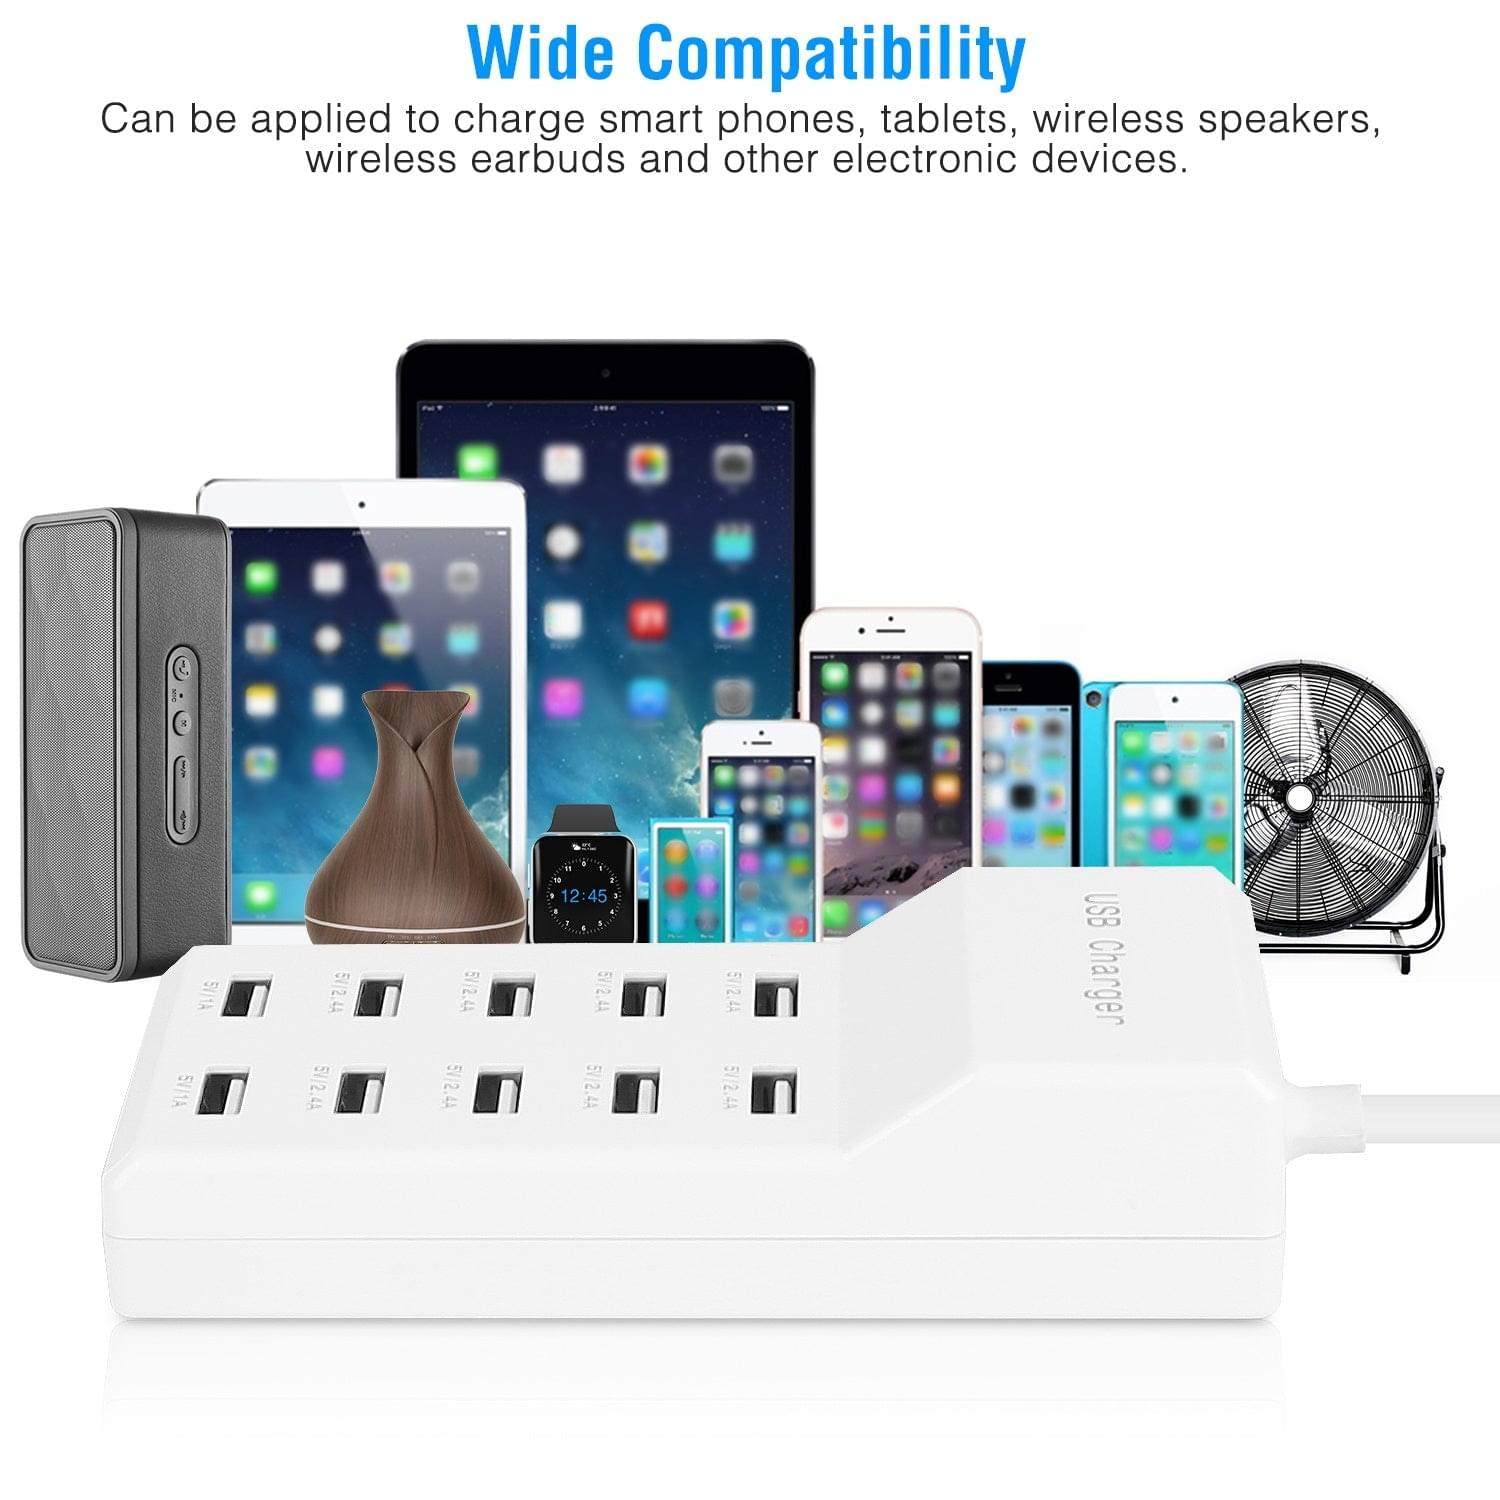 10 Ports USB Charging Station Hub 50W USB Wall Charger Fast Charging Power Adapter for Phone Tablet Moorescarts